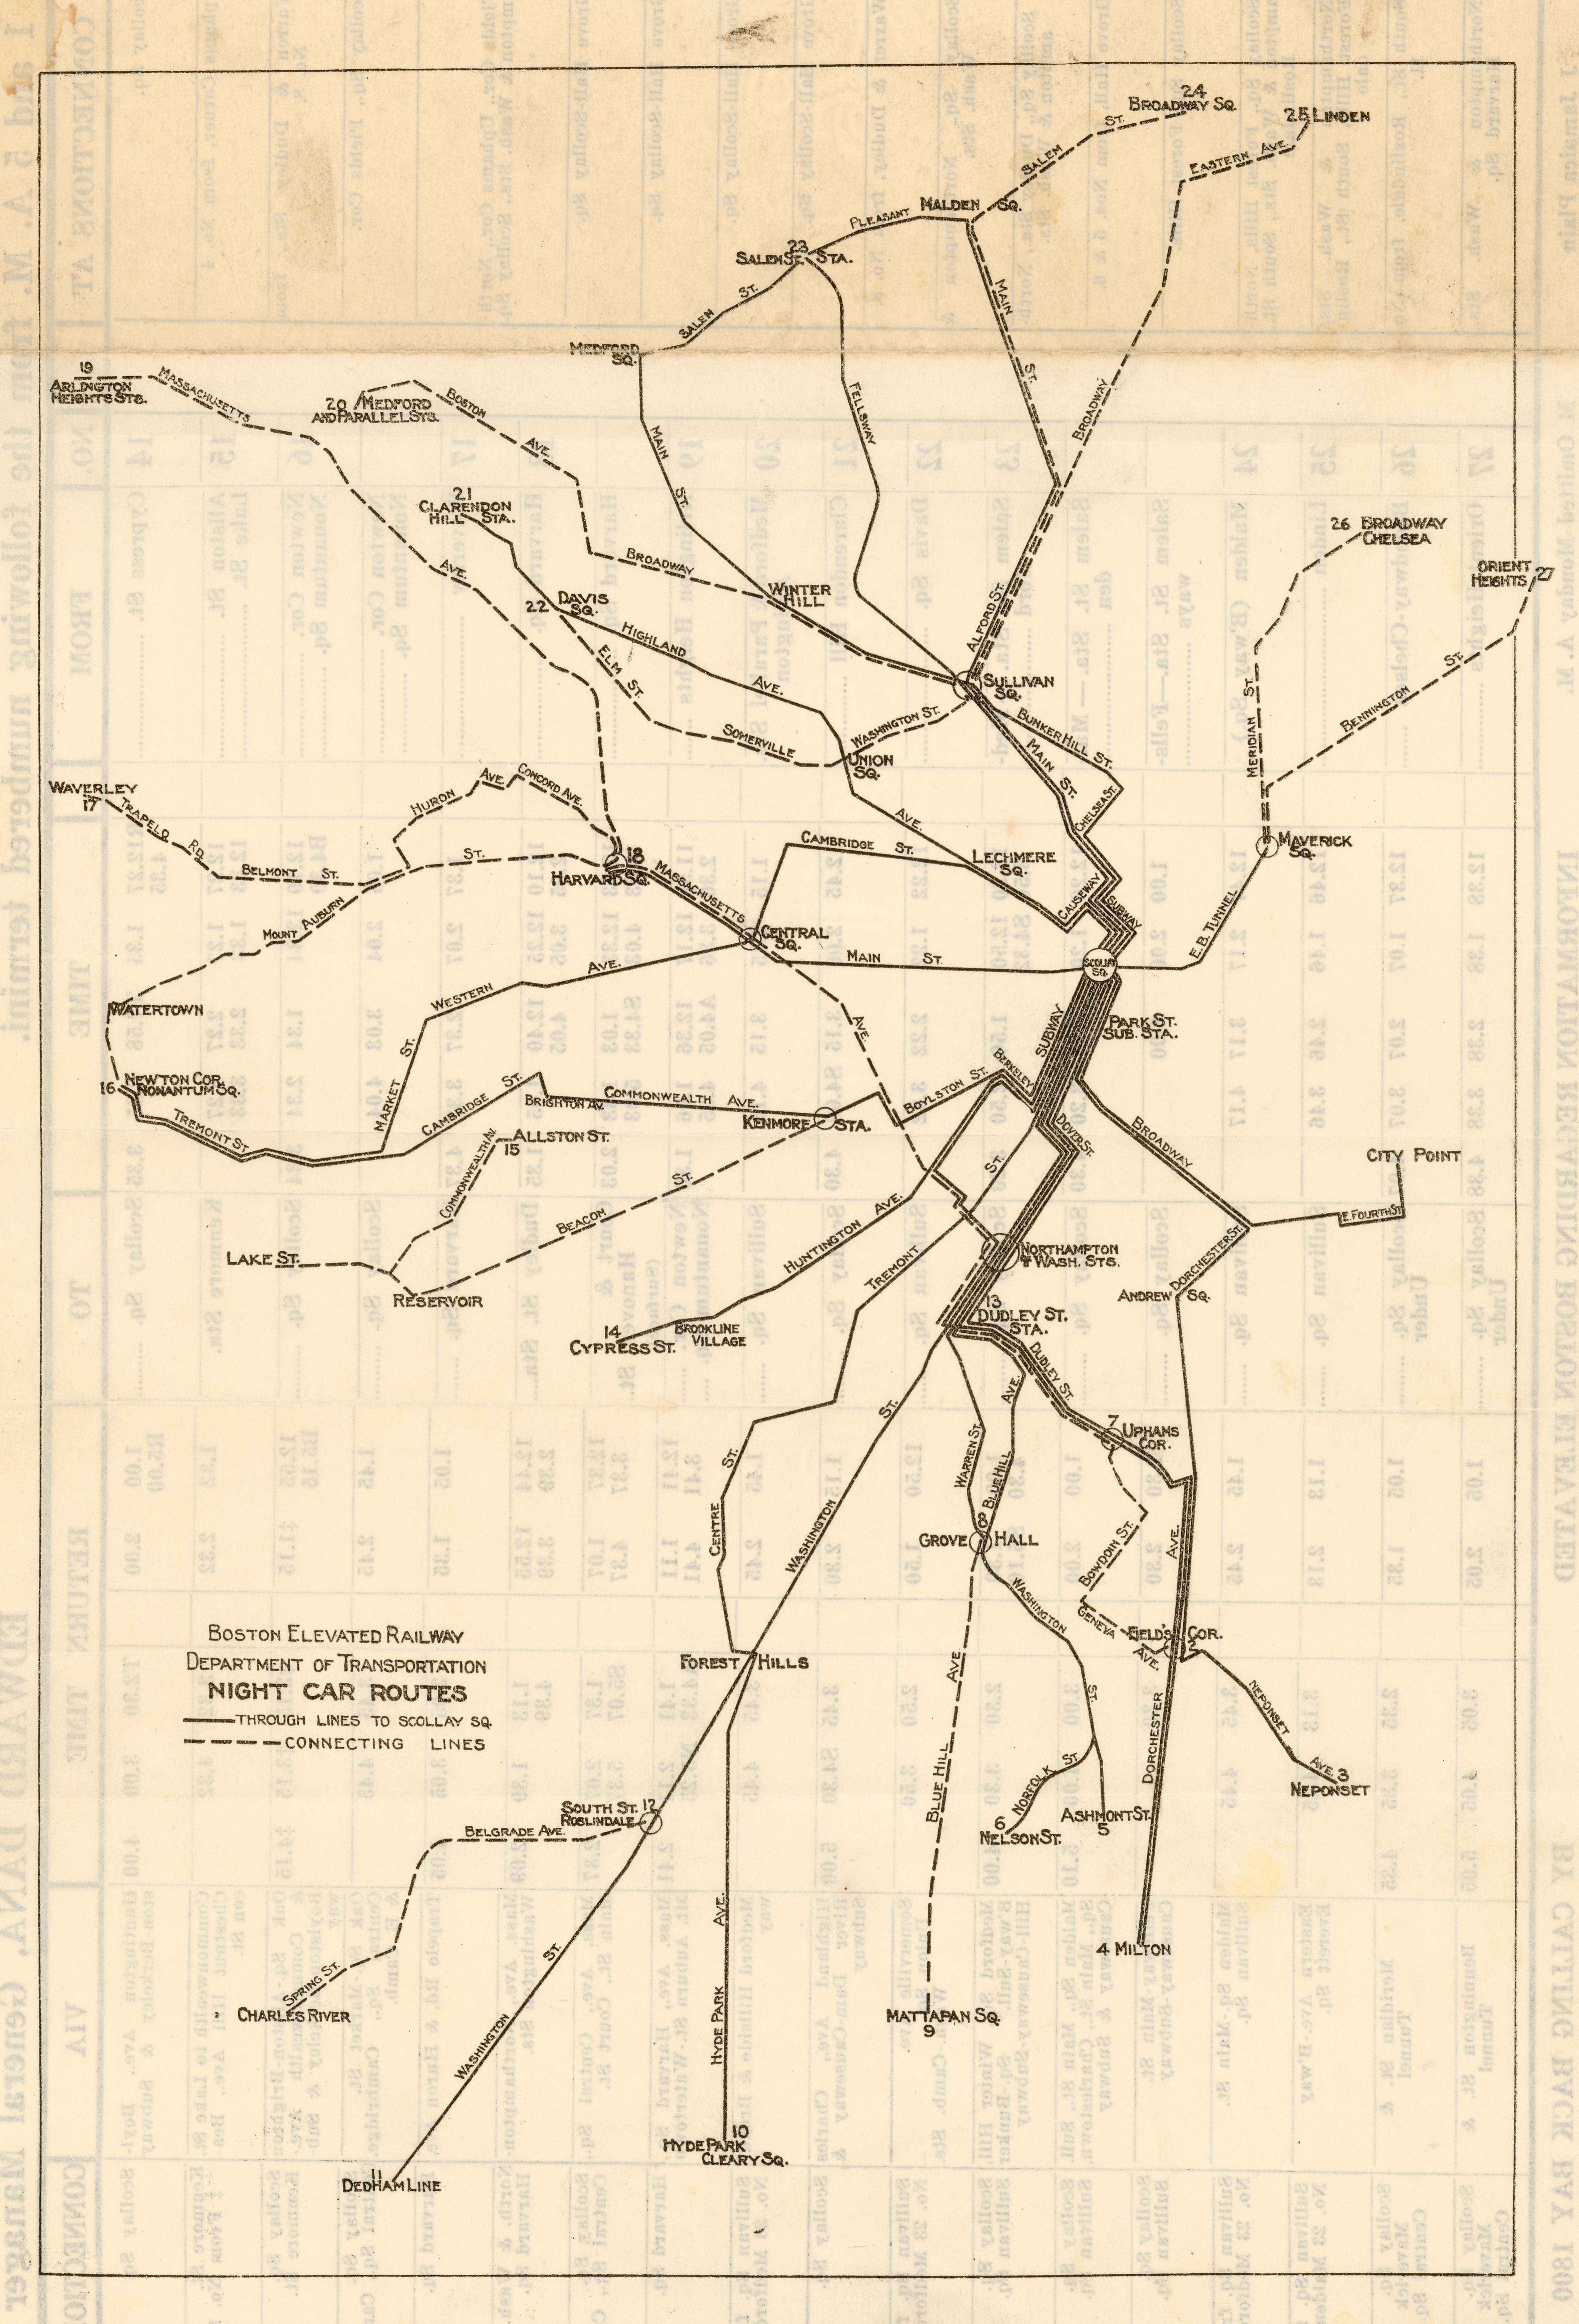 Image of “Night Car Routes” from “Night Cars: Routes and Schedules”